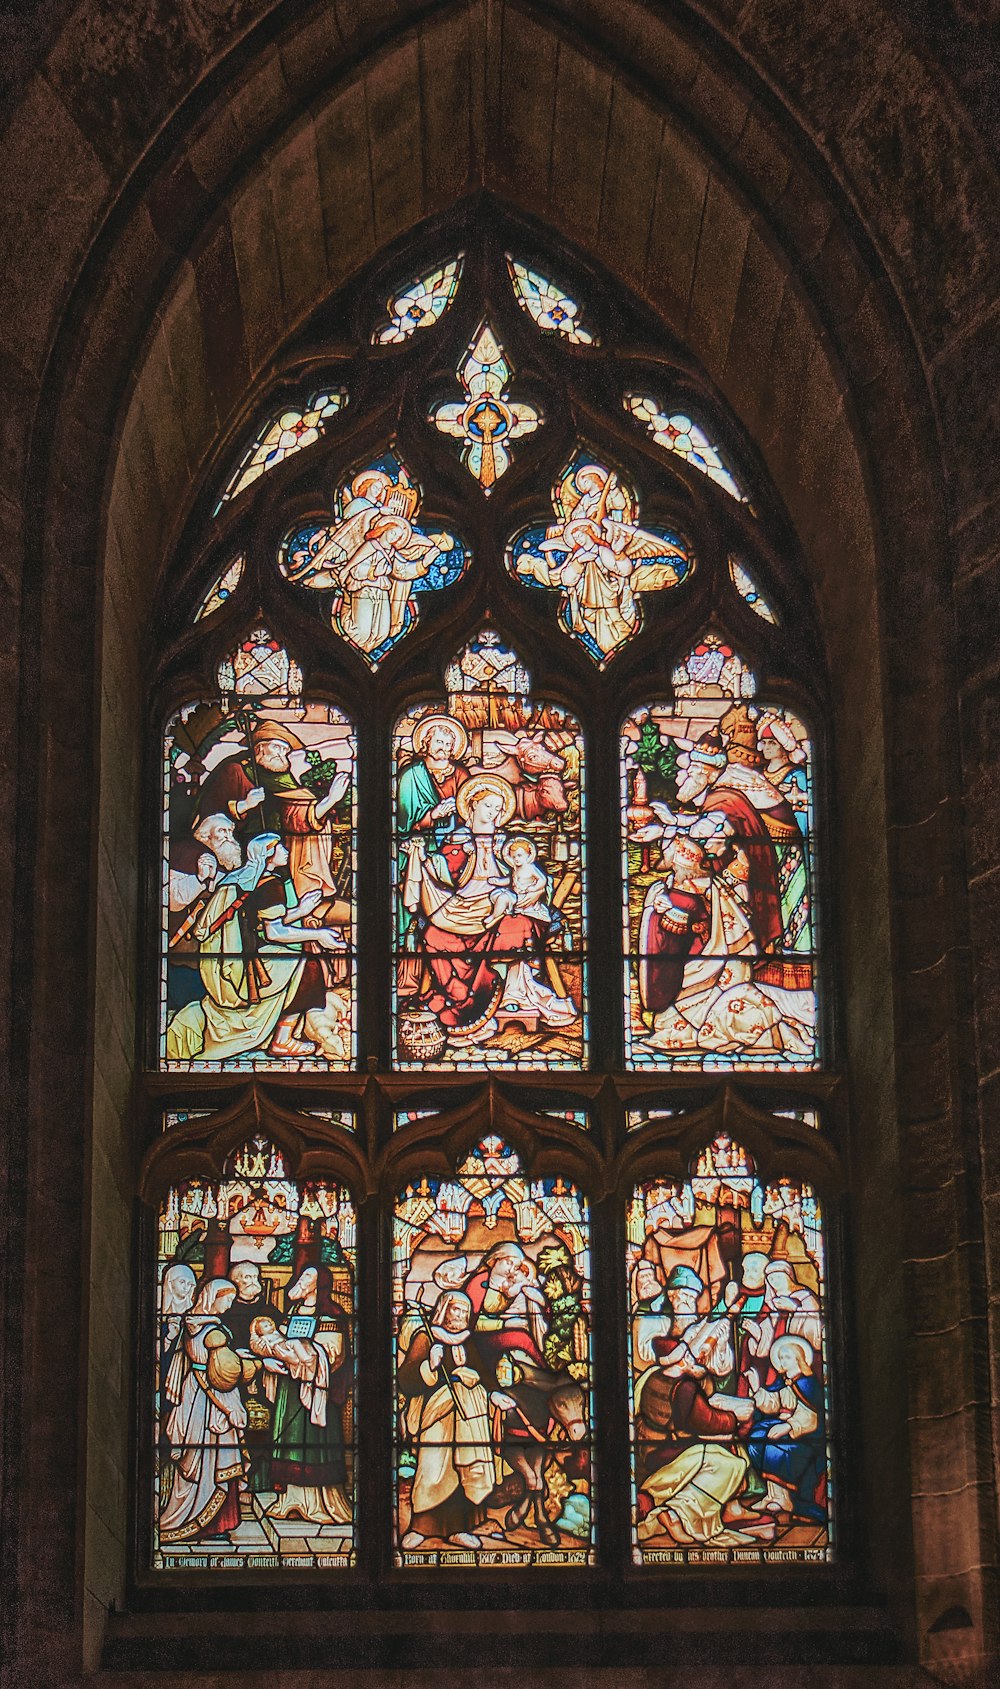 a large stained glass window in a stone building